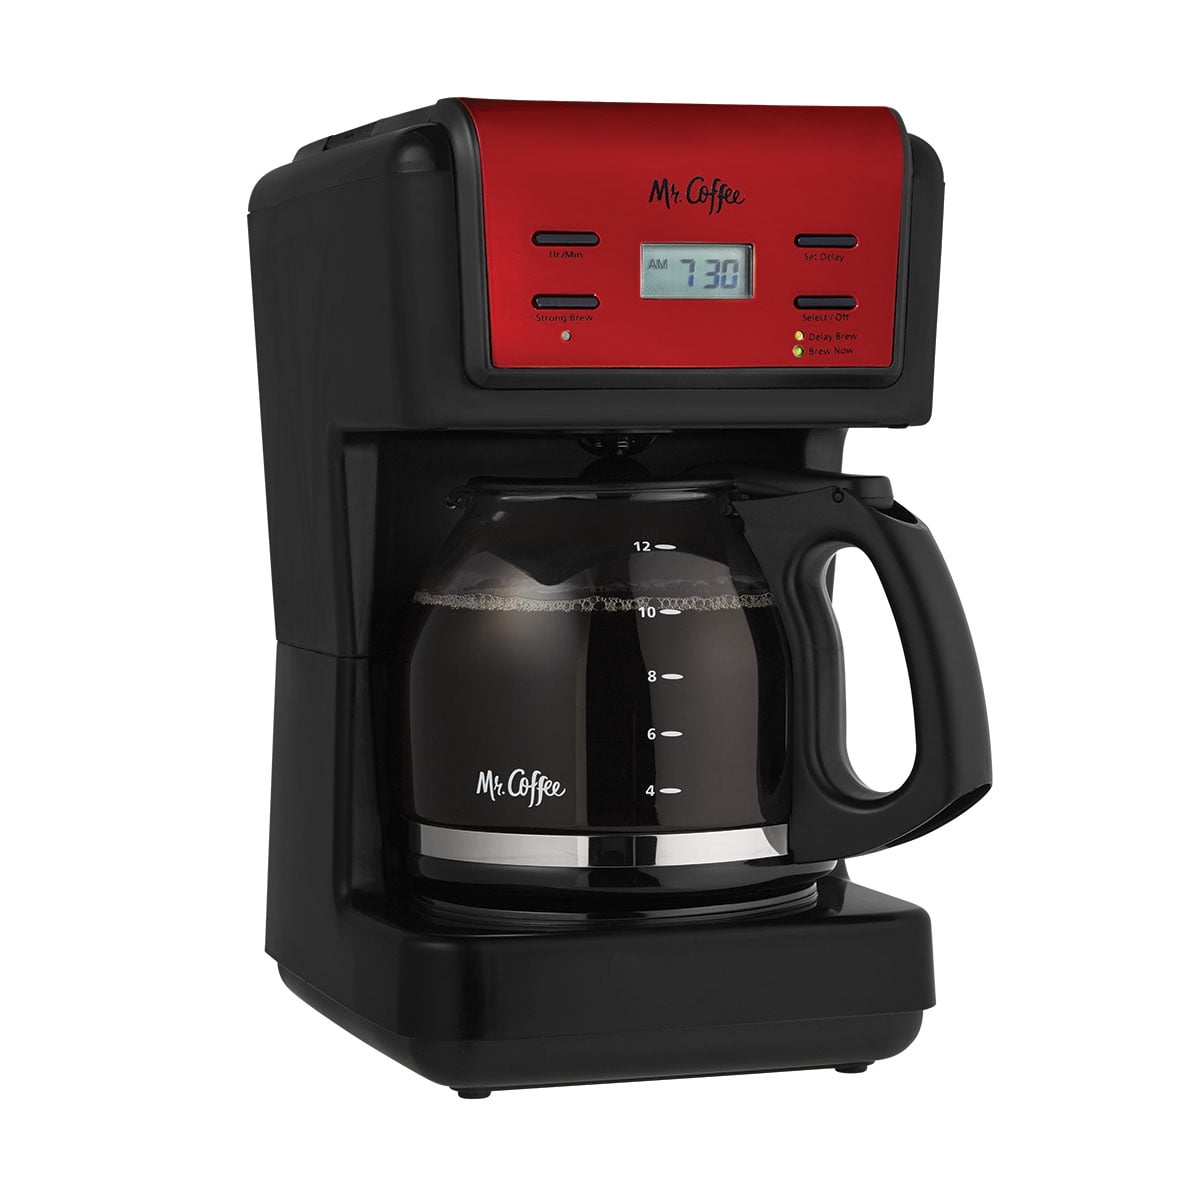 Mr. Coffee 12-Cup Programmable Coffeemaker, Rapid Brew, Red – R & B Import